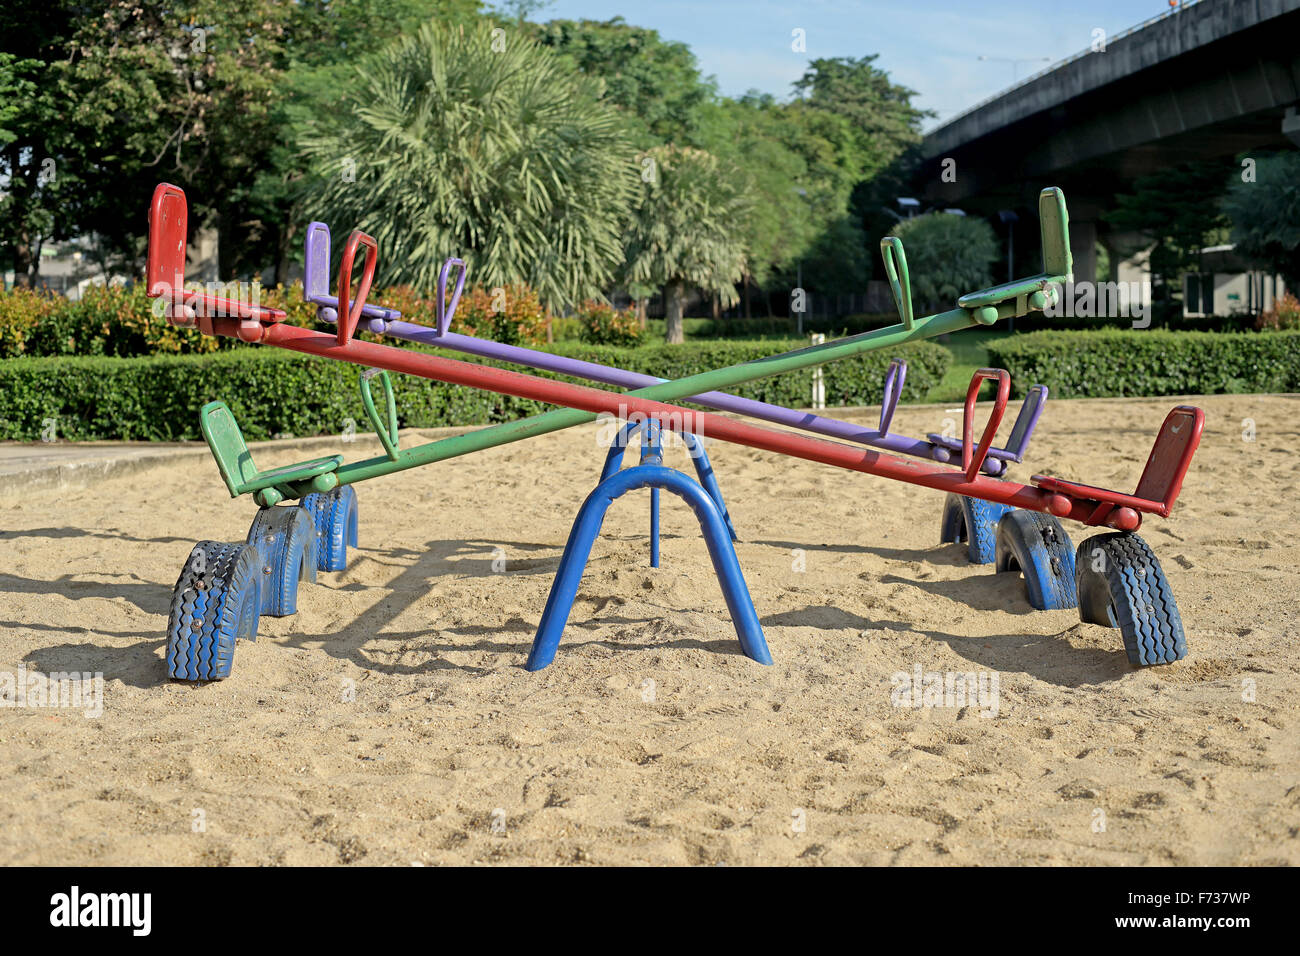 old seesaw or teeter-totter in kids playground Stock Photo